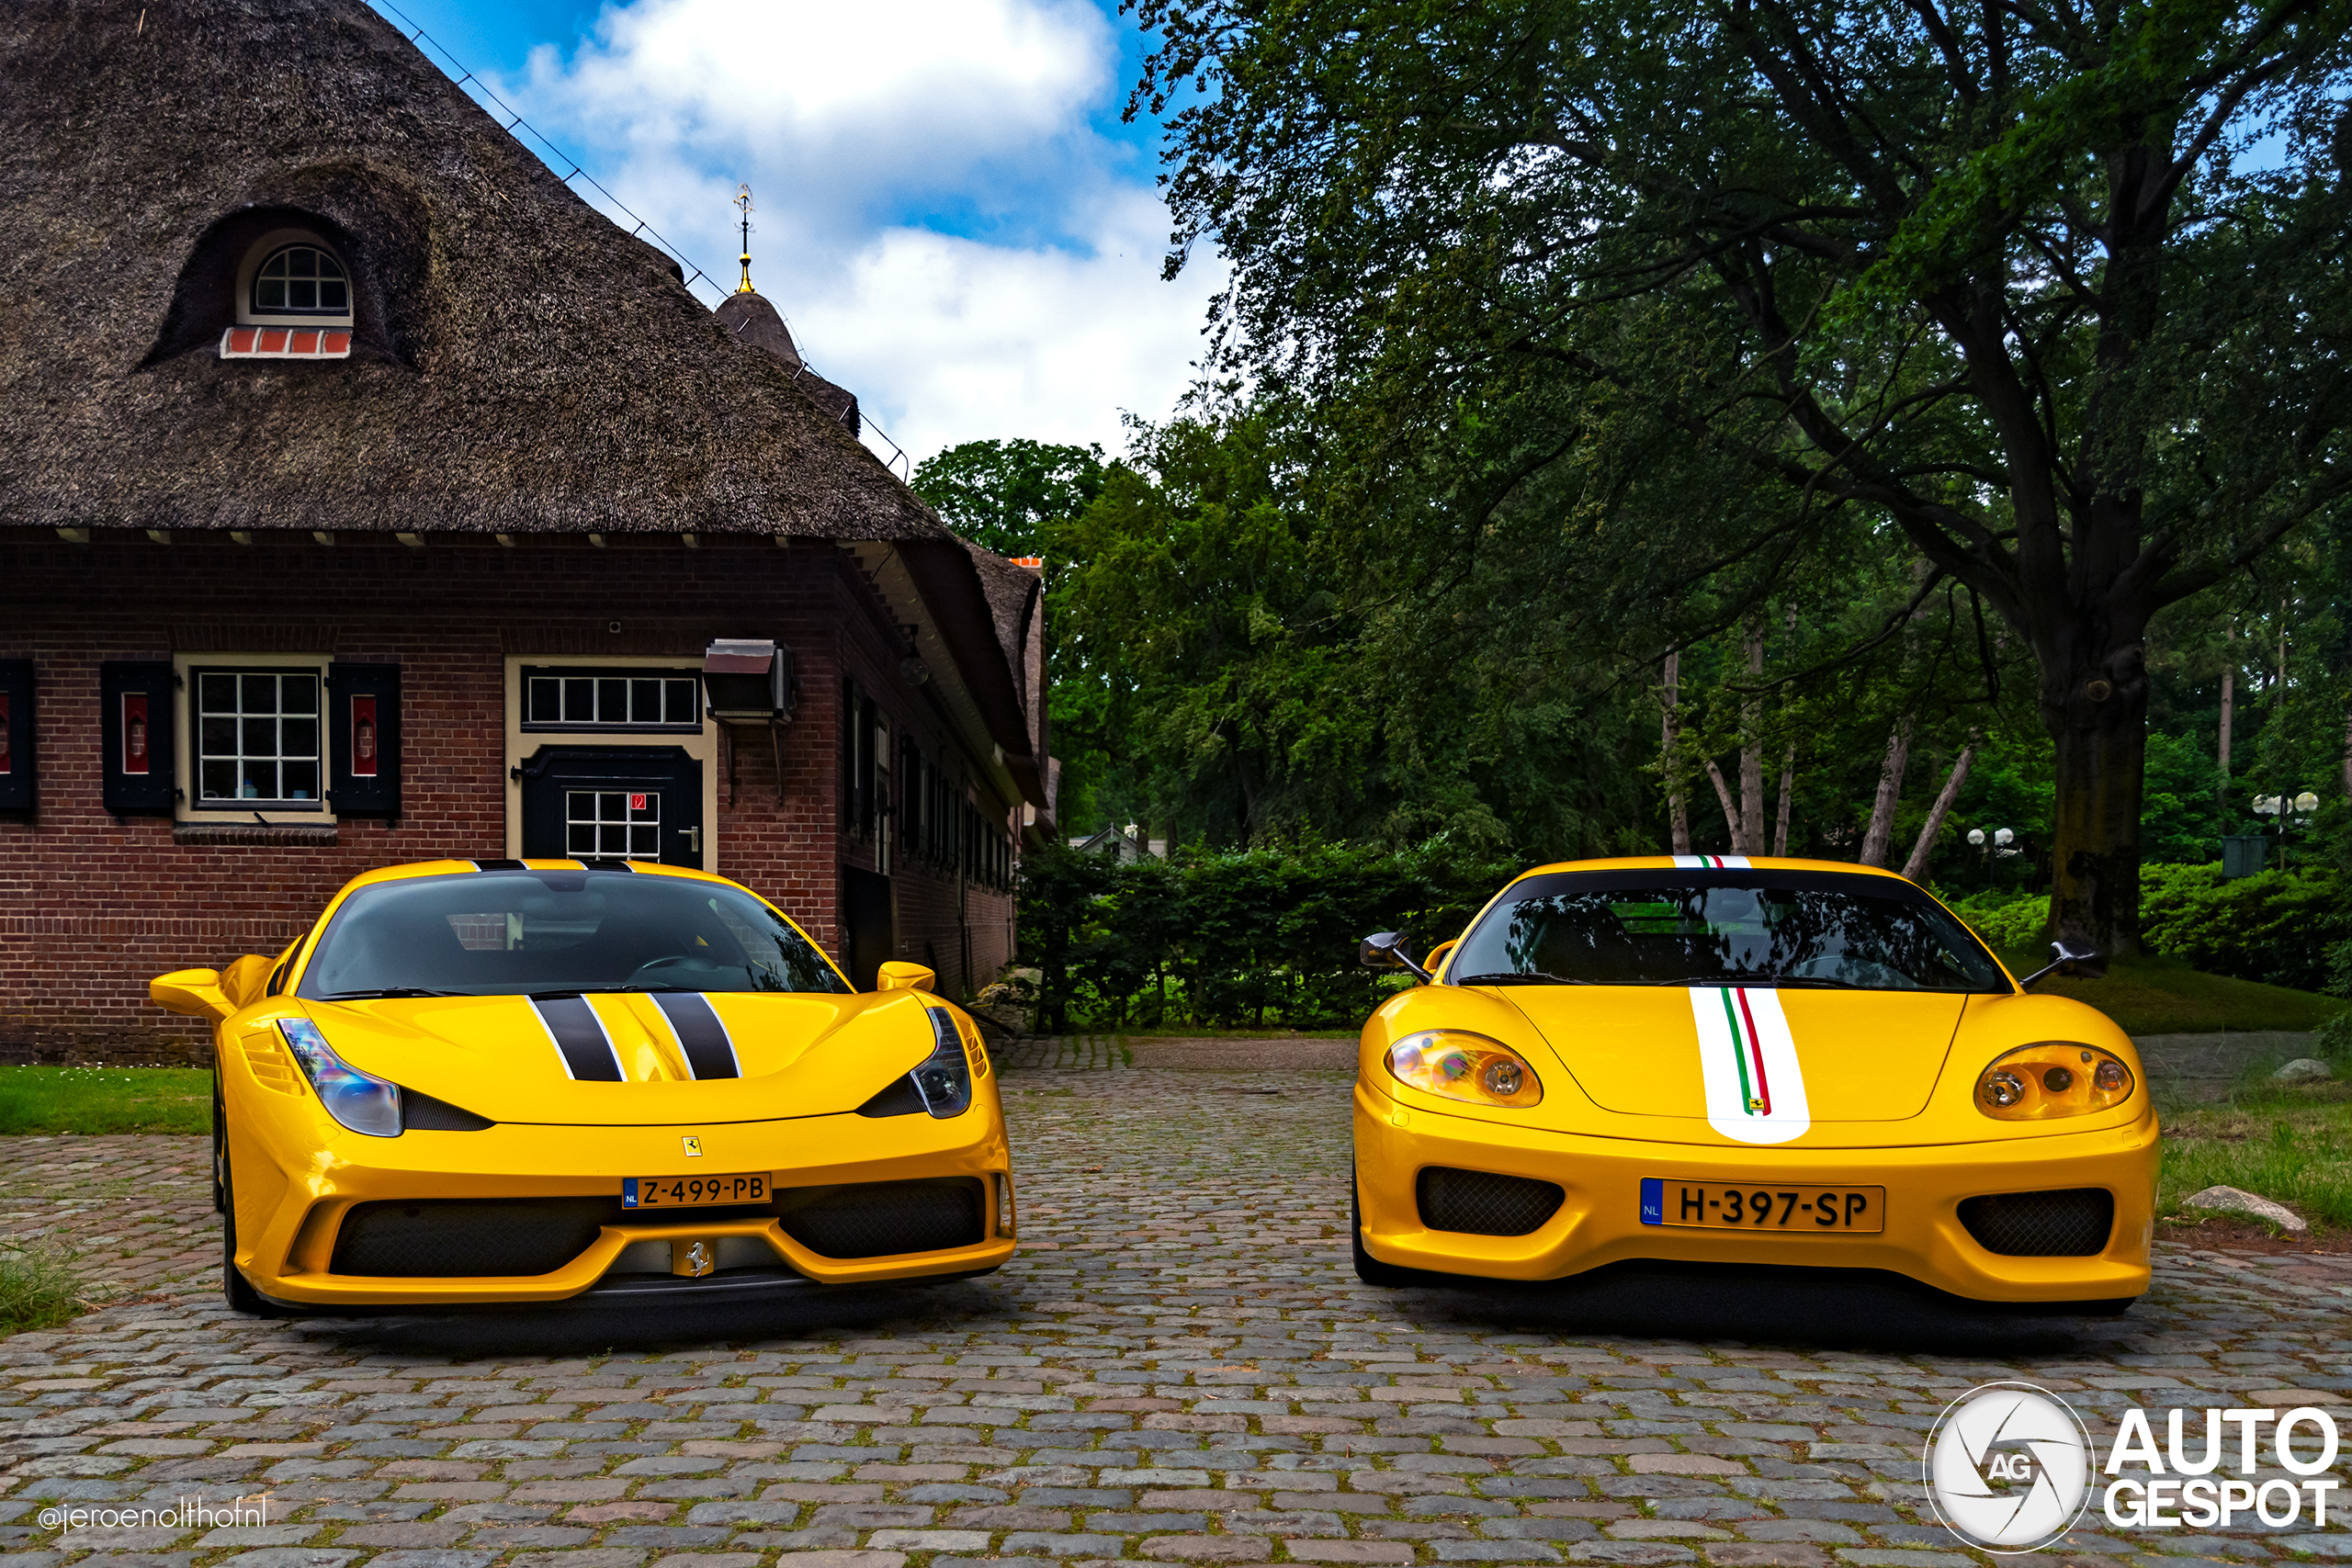 Impressive images of two yellow Ferraris